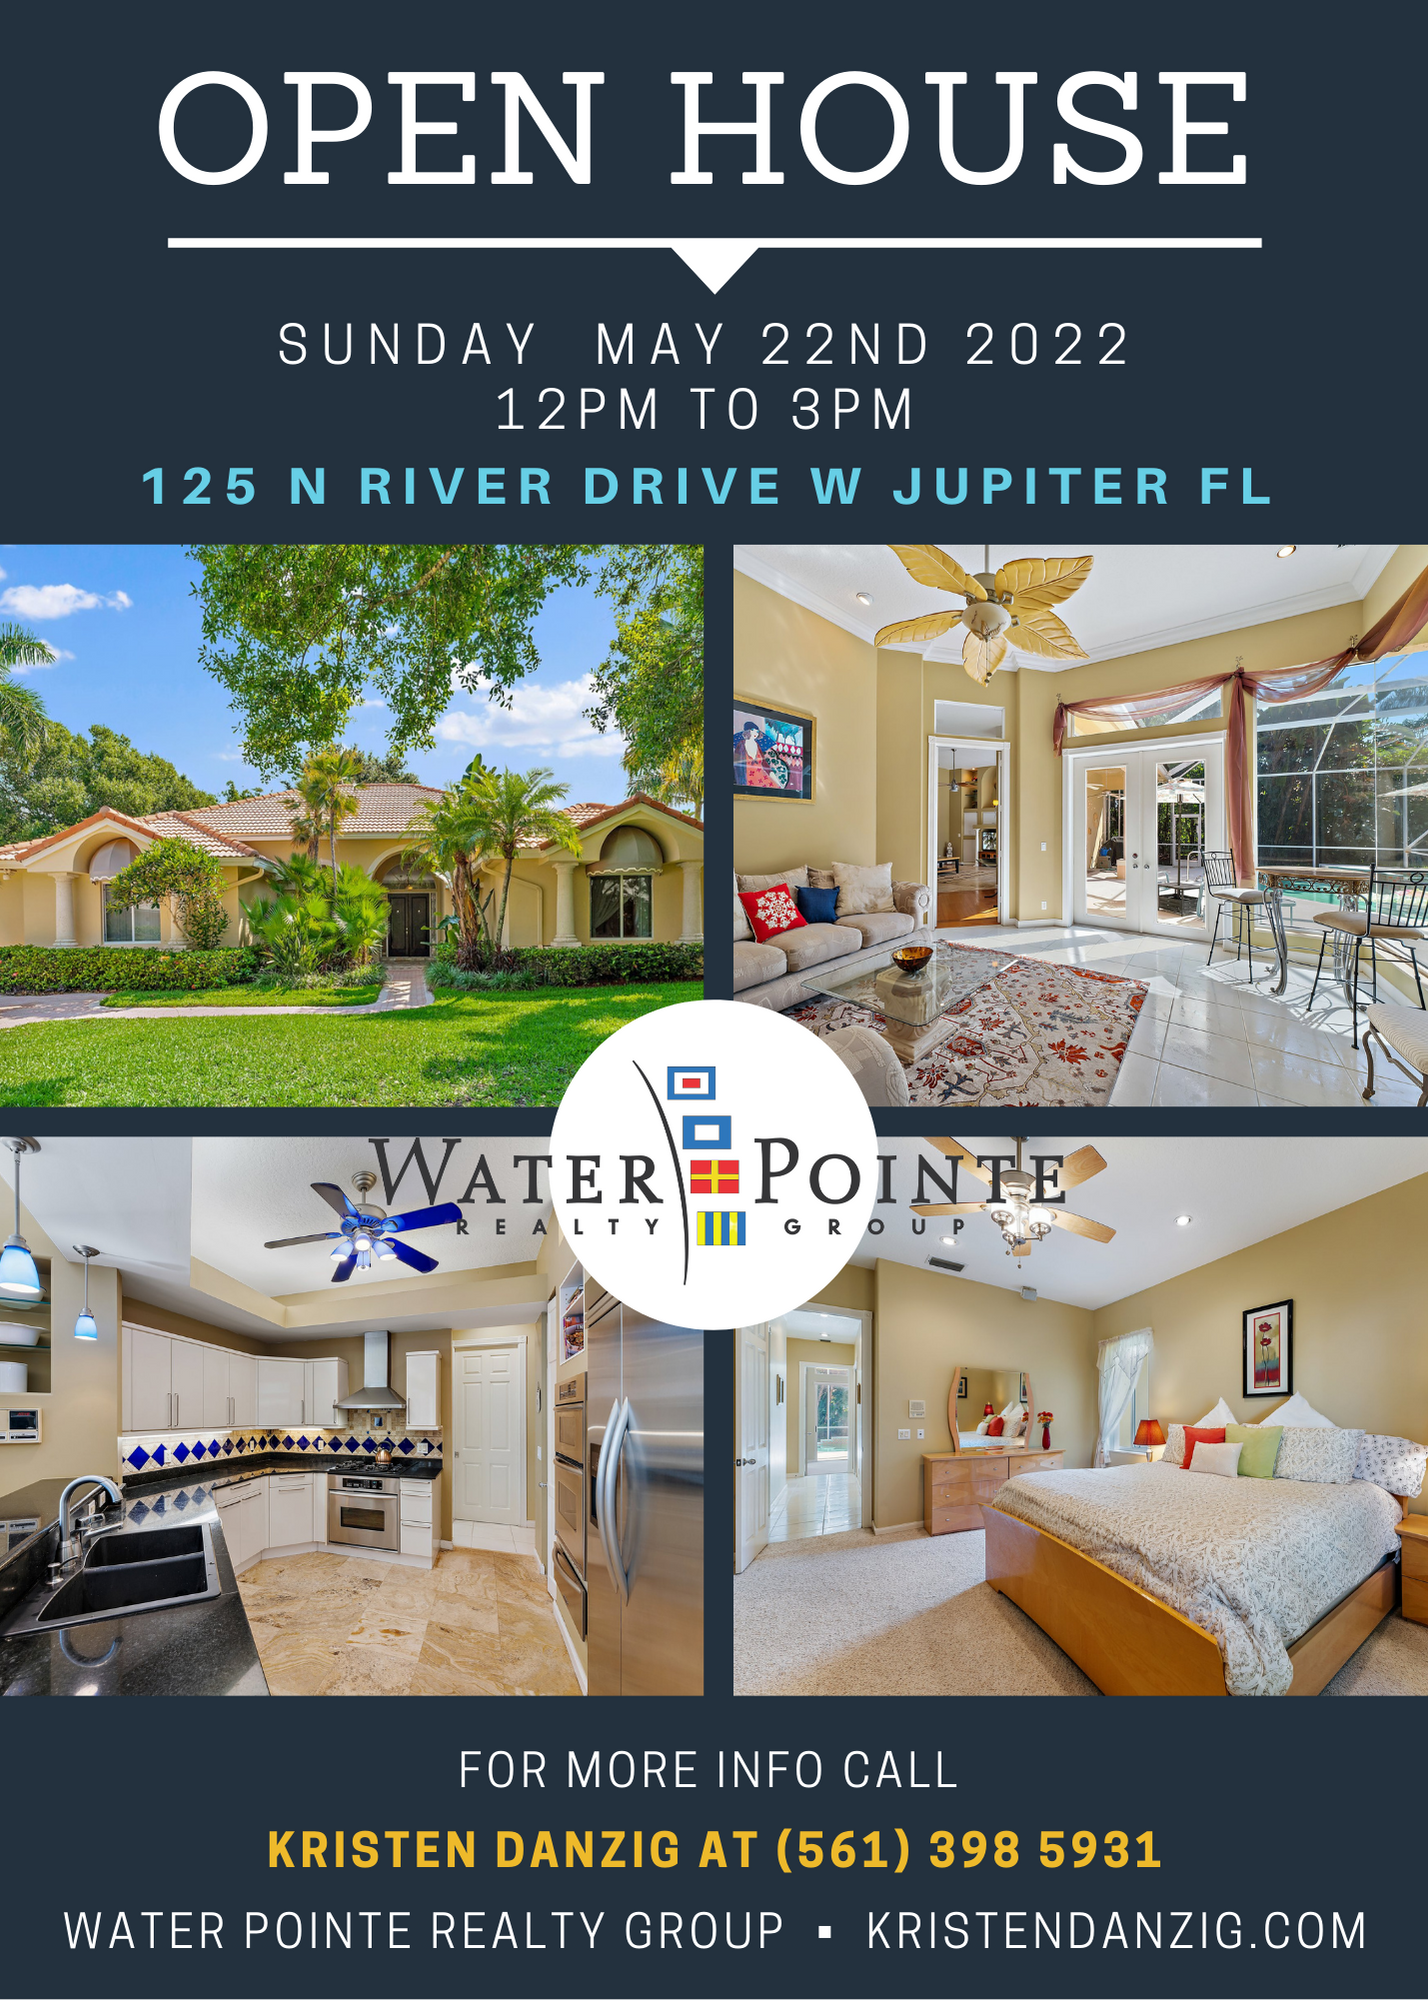 OPEN HOUSE IN JUPITER FL  – MAY 22ND 12 TO 3PM